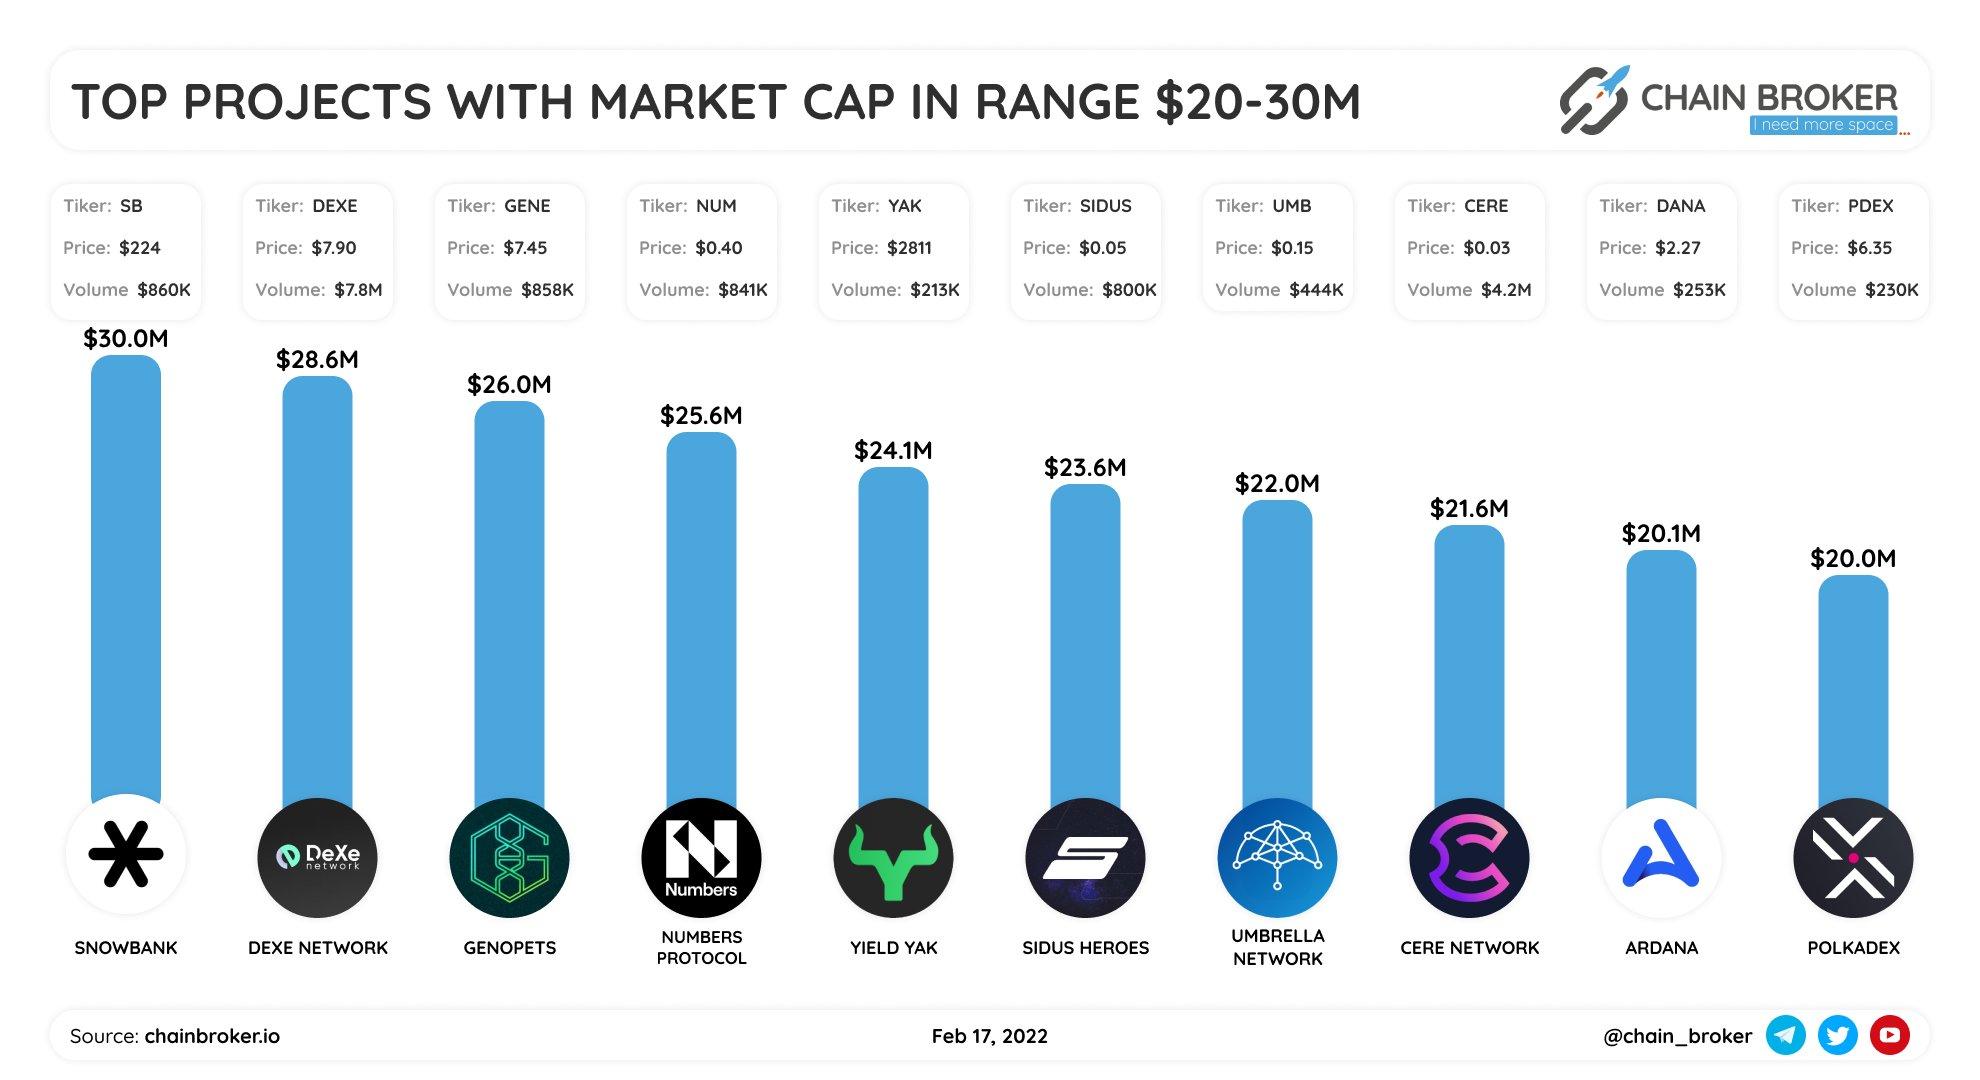 Top projects with market cap $20M-$30M